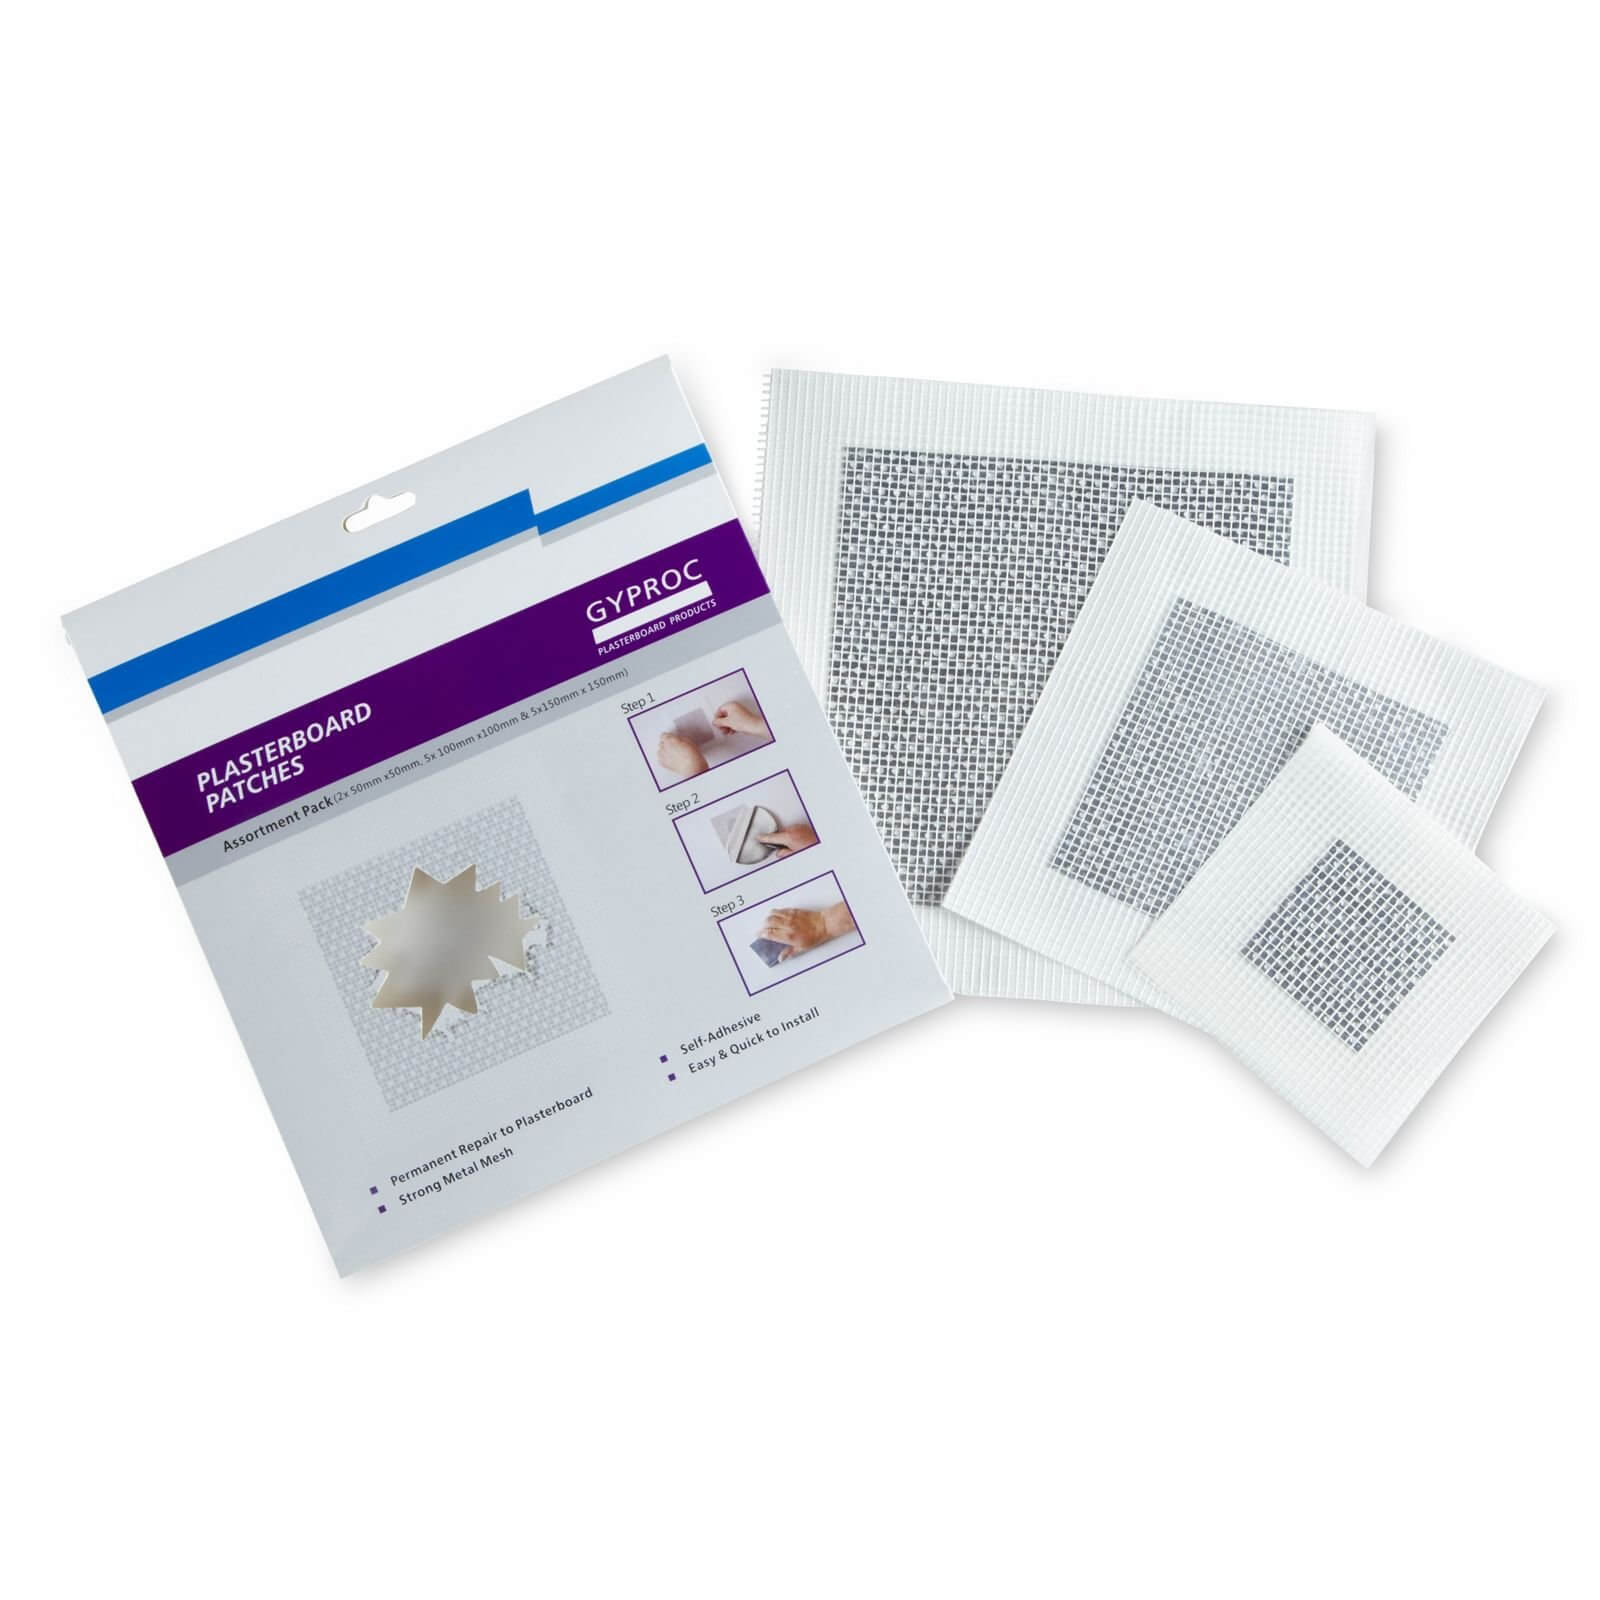 Gyproc Plasterboard Patches Assortment Pack